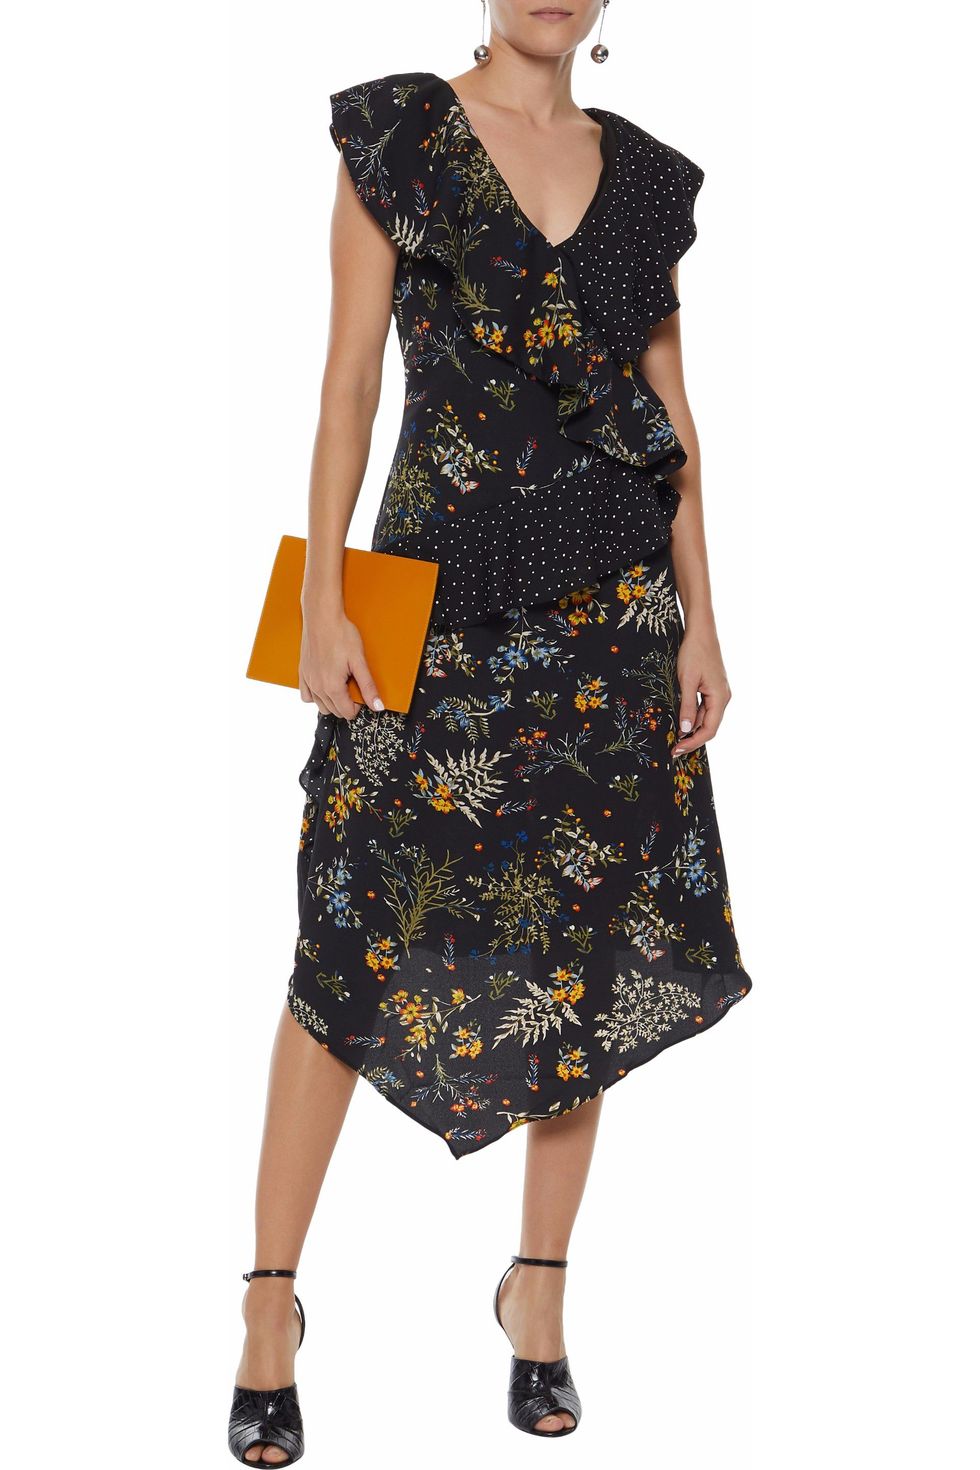 15 Fall Wedding Guest Dresses - What to Wear to a Fall Wedding